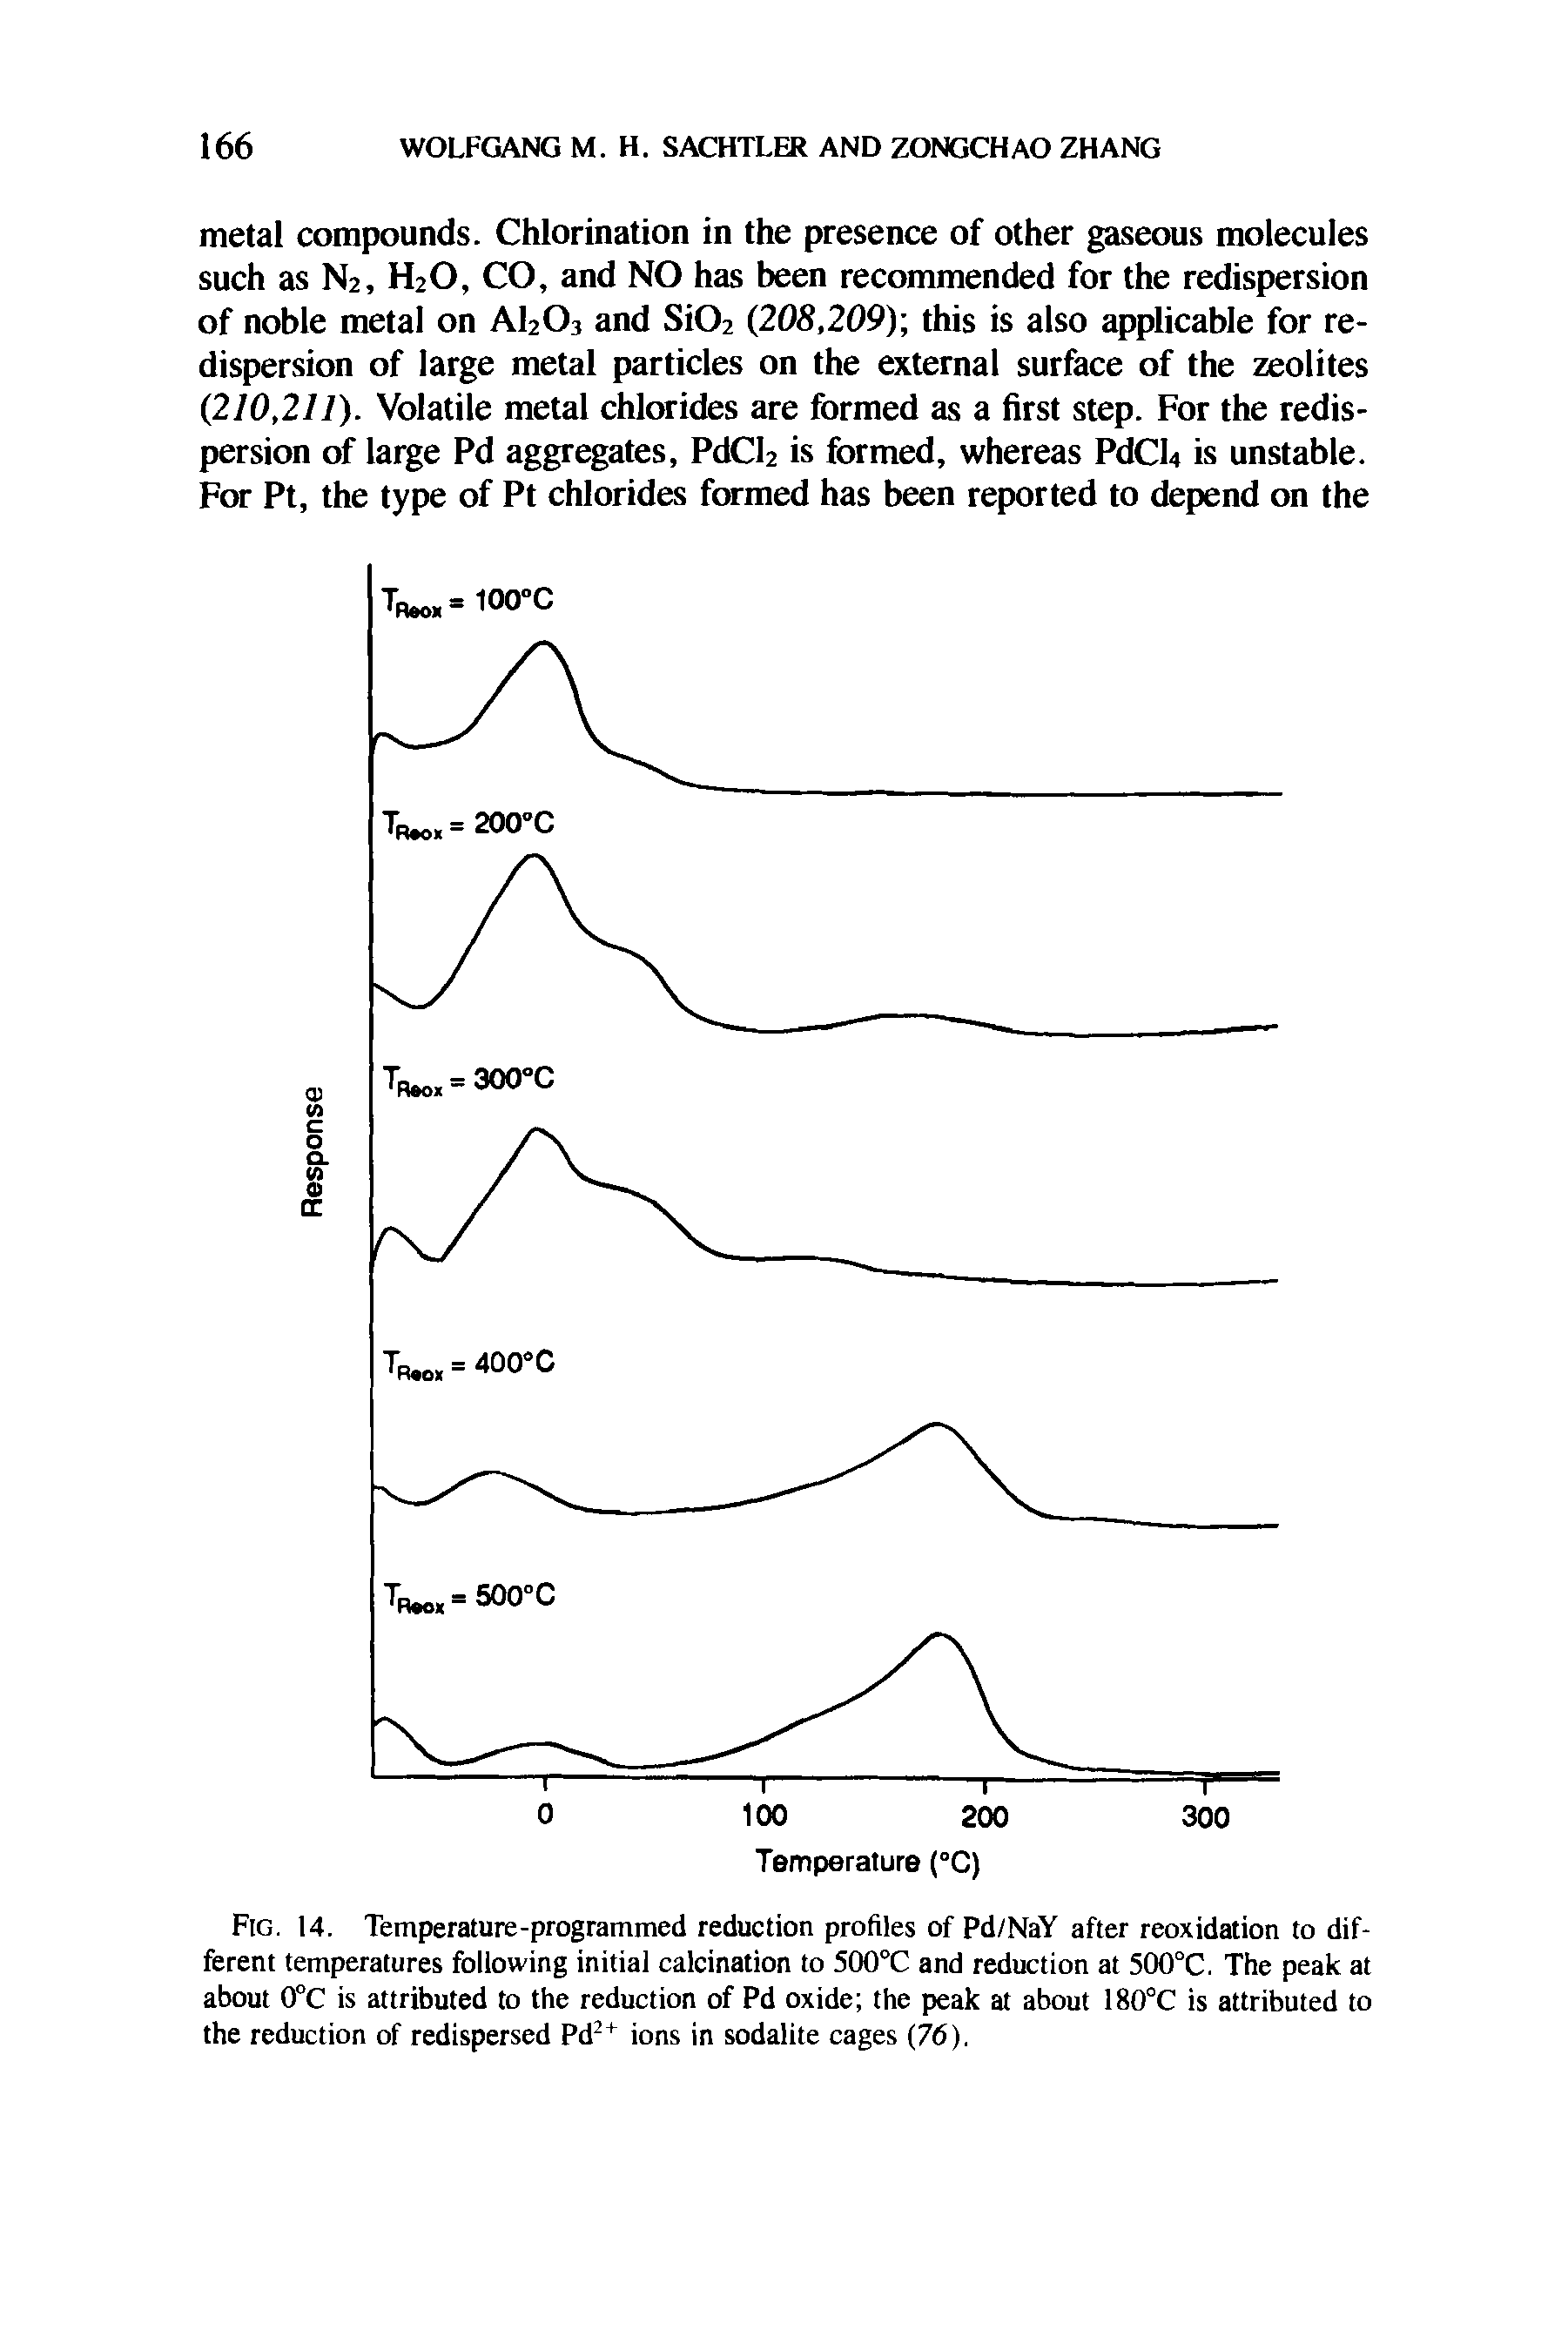 Fig. 14. Temperature-programmed reduction profiles of Pd/NaY after reoxidation to different temperatures following initial calcination to 500°C and reduction at 500°C. The peak at about 0°C is attributed to the reduction of Pd oxide the peak at about 180°C is attributed to the reduction of redispersed Pd ions in sodalite cages (76).